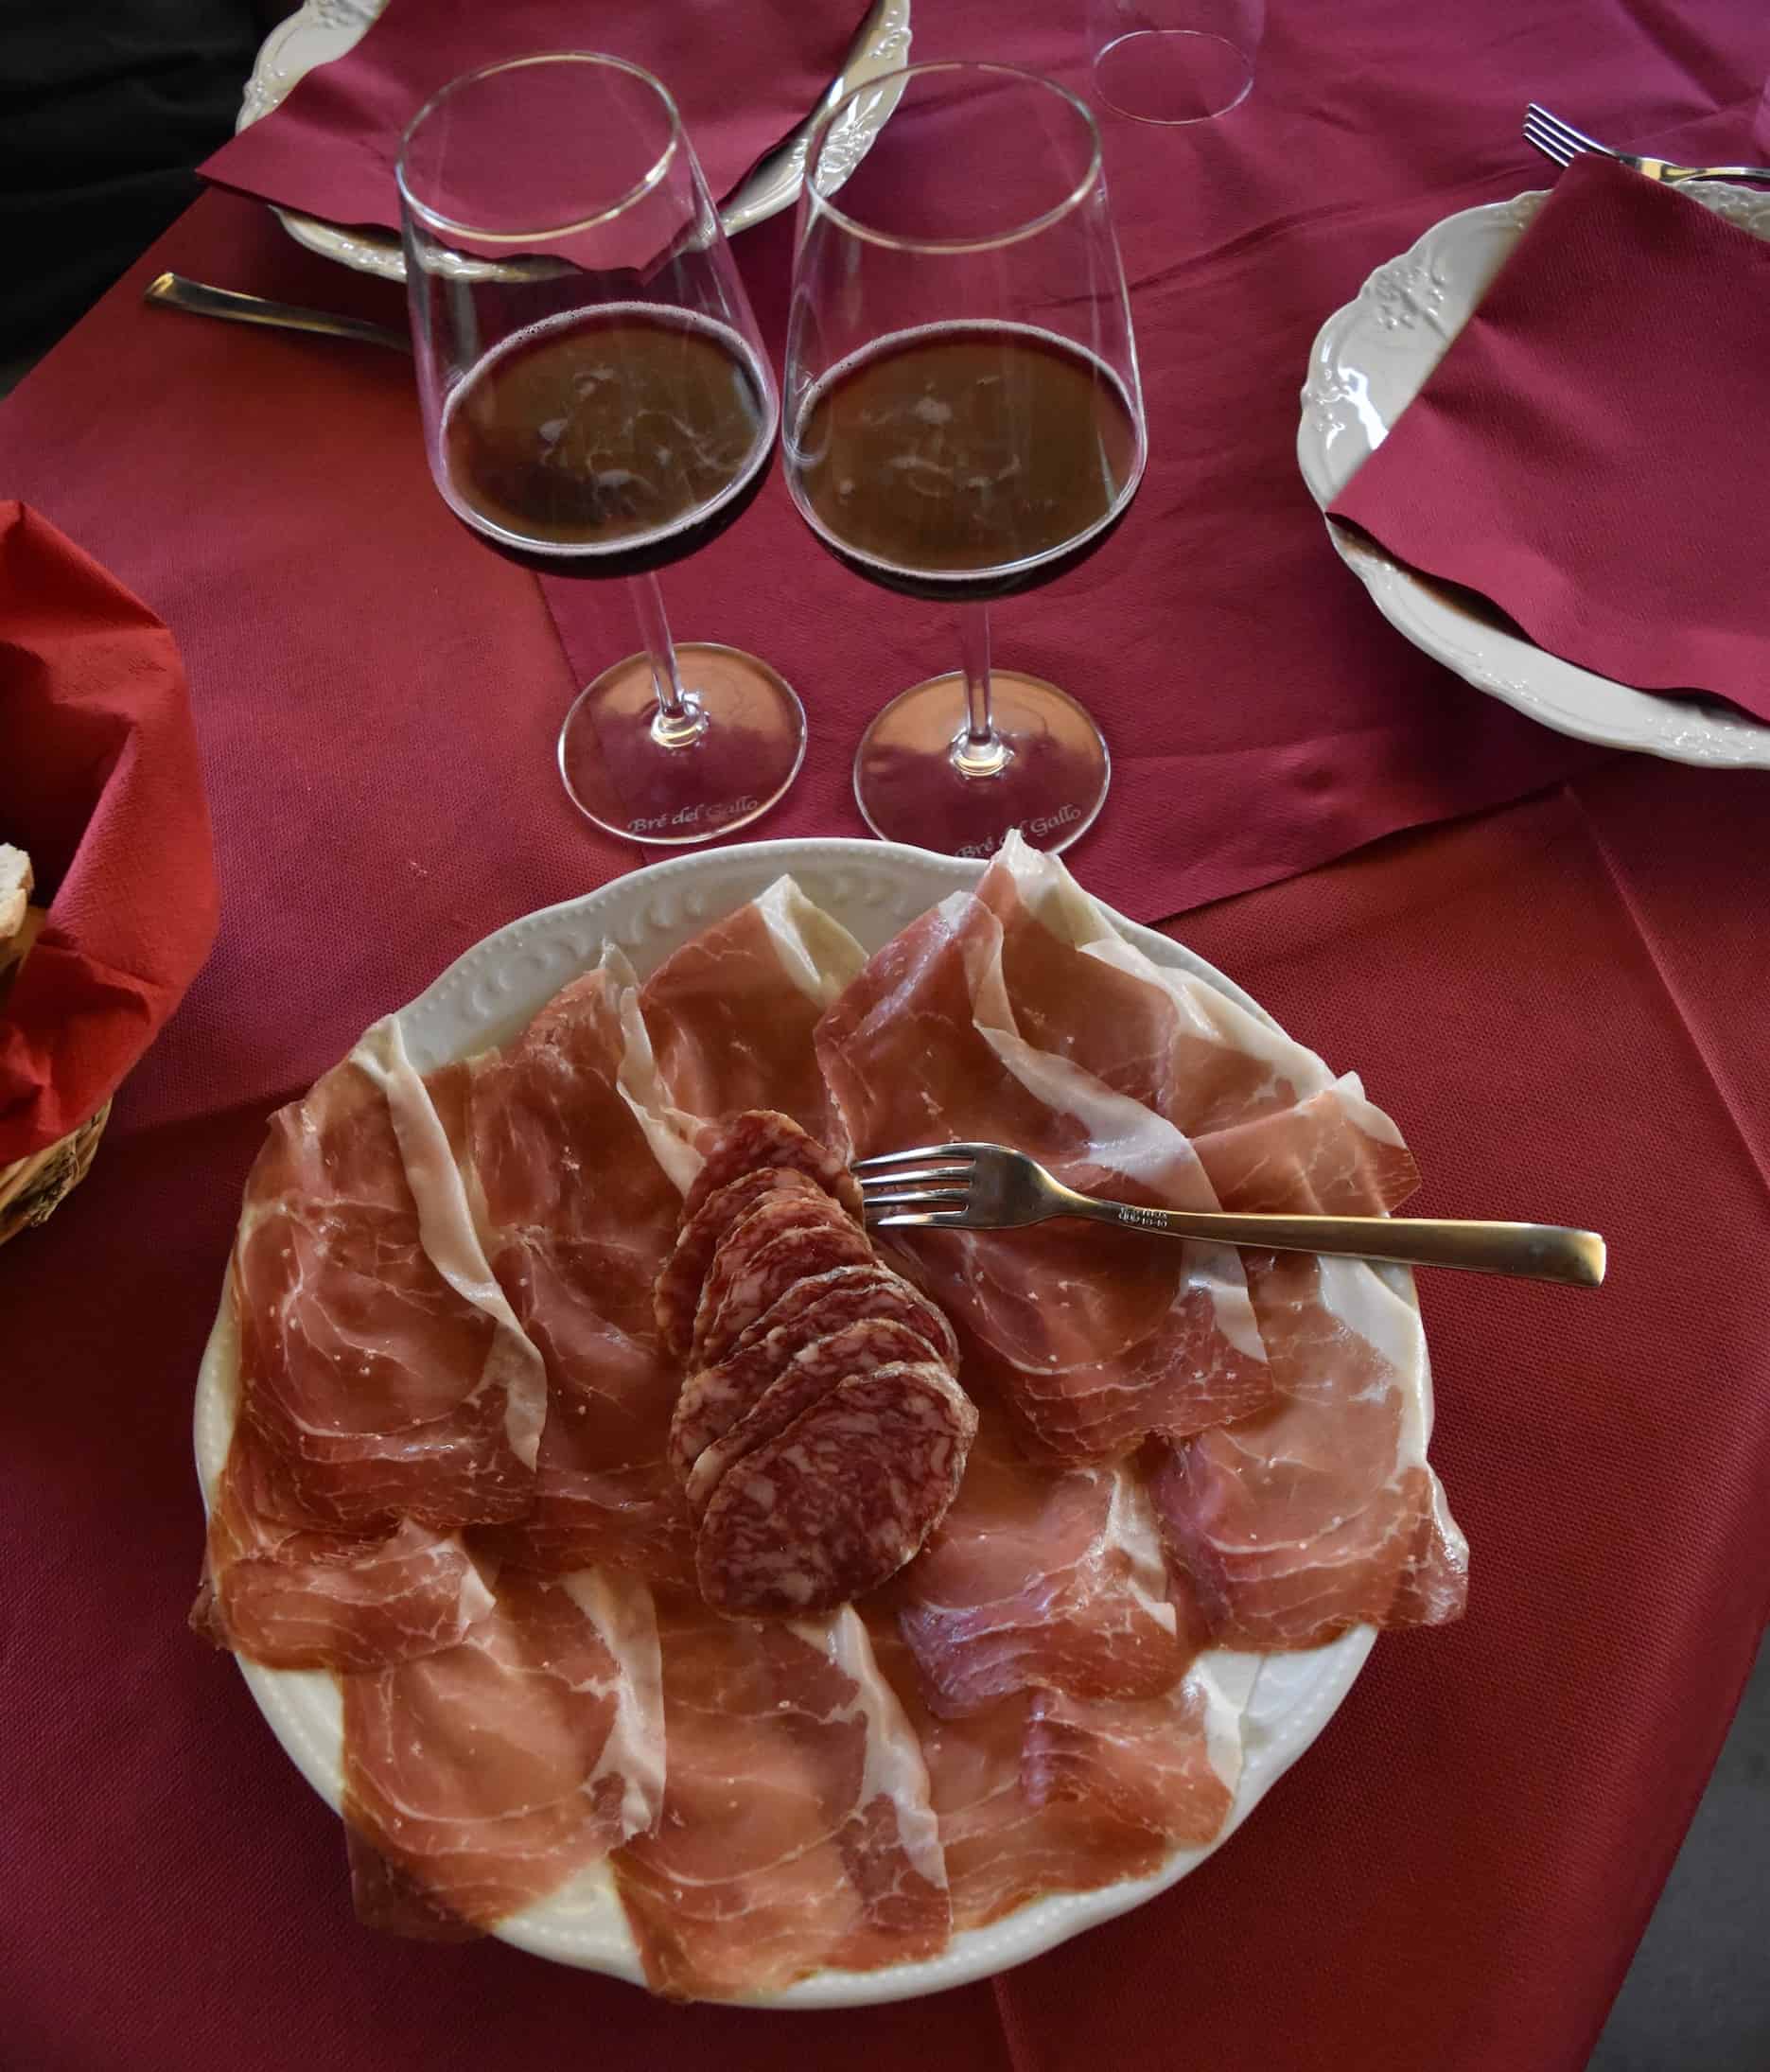 A plate filled with Culatello - italian cured pork from Emilia Romagna